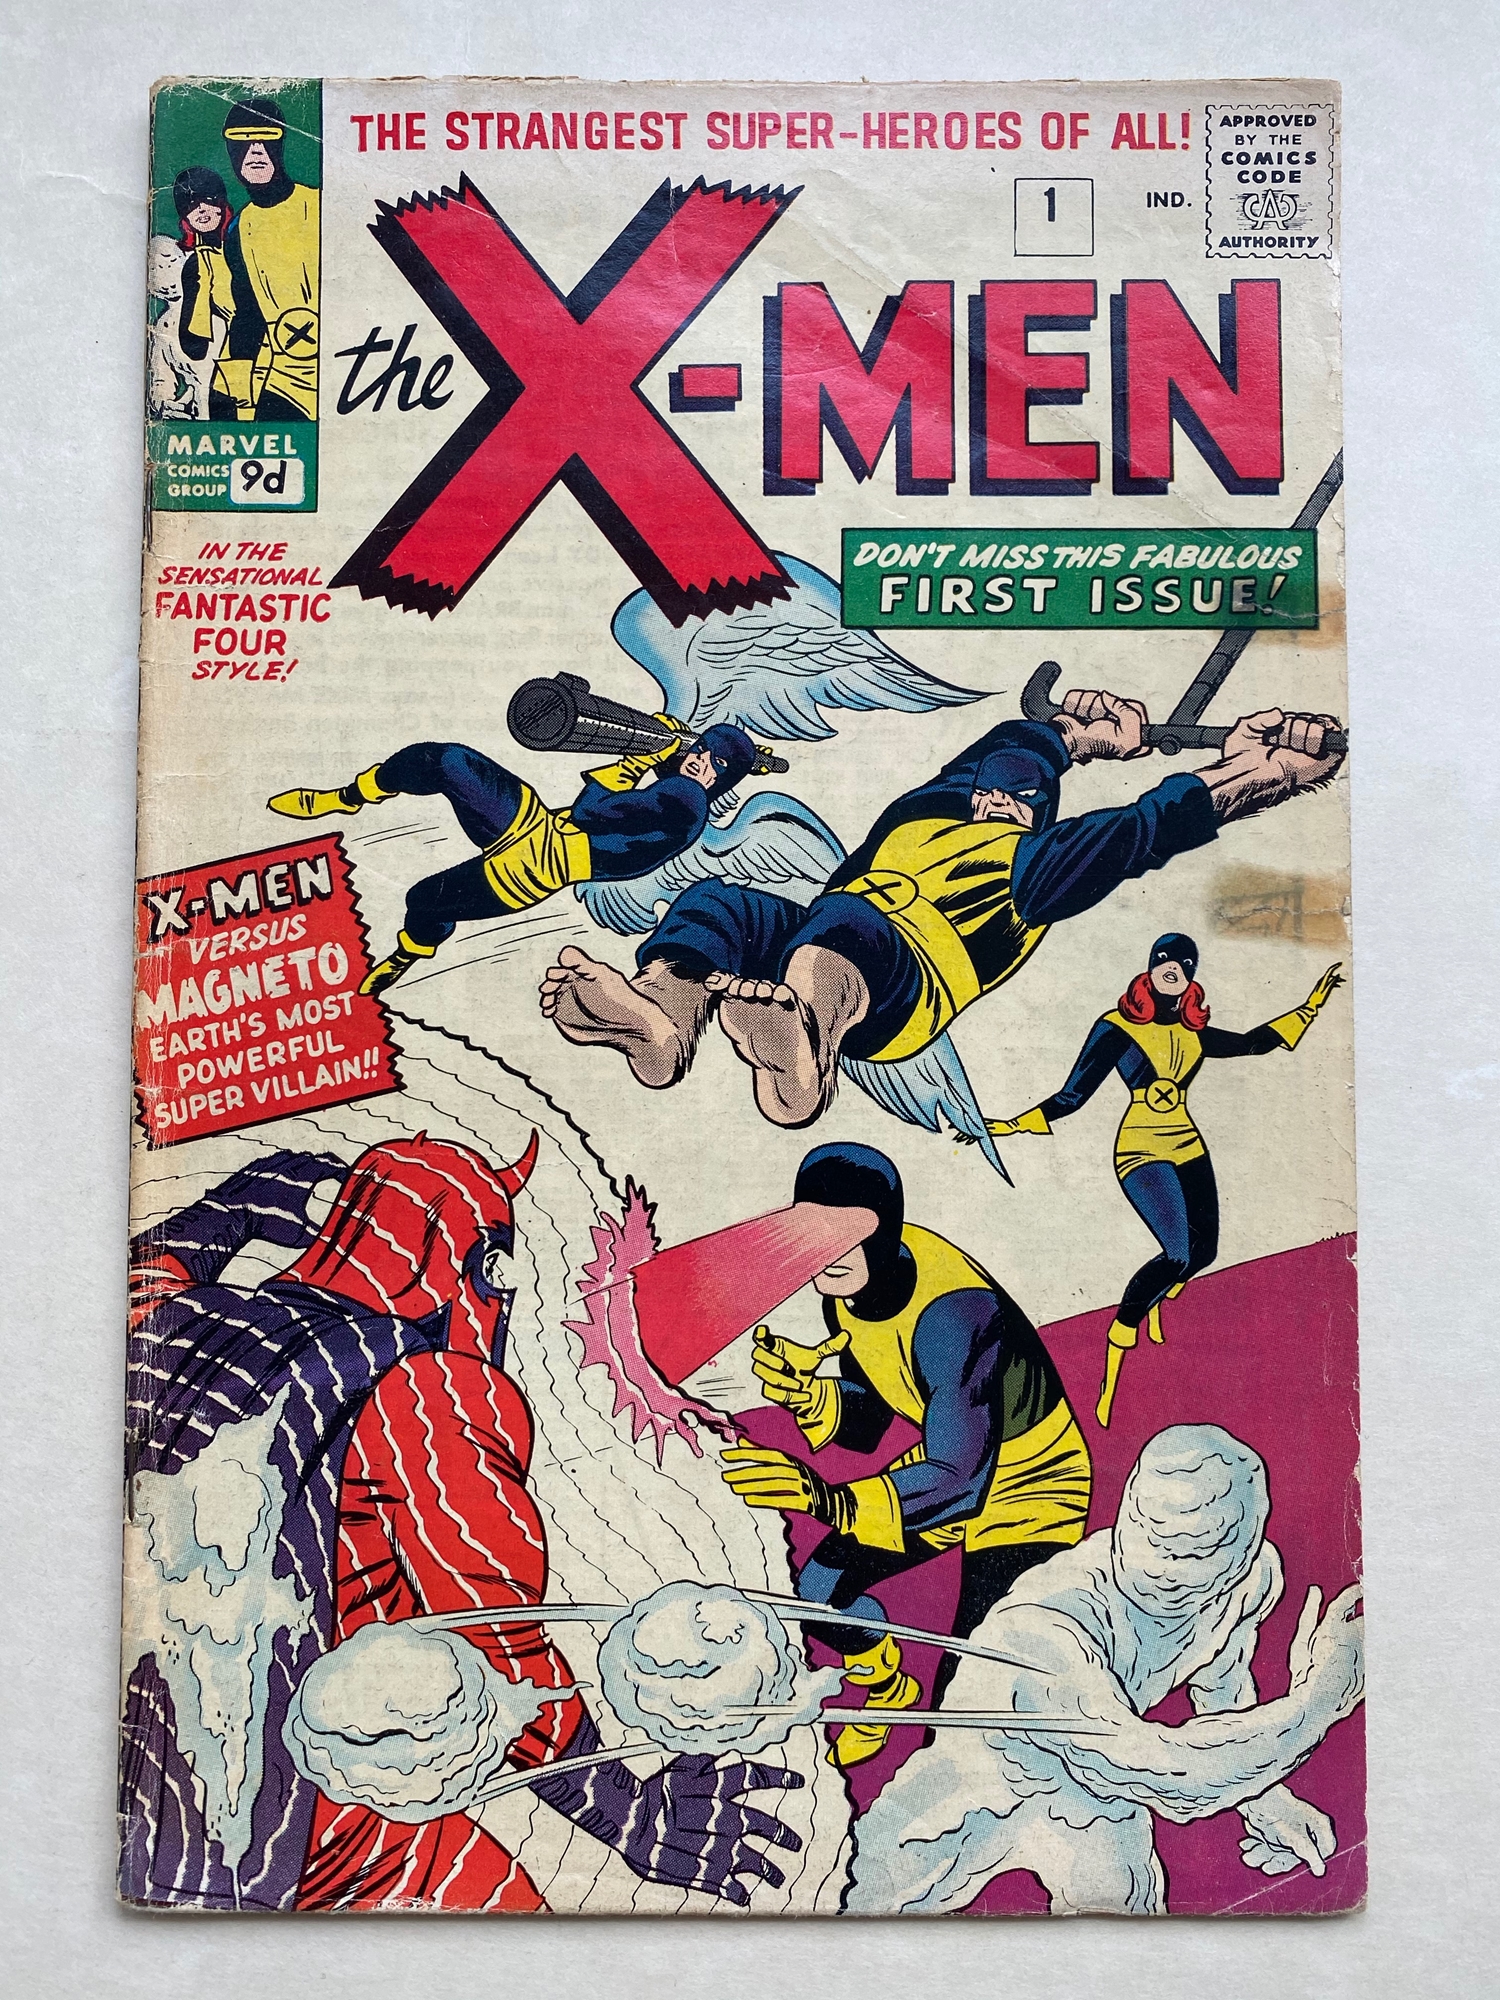 UNCANNY X-MEN #1 - (1963 - MARVEL - Pence Copy) - One of the most important Marvel Silver Age keys -